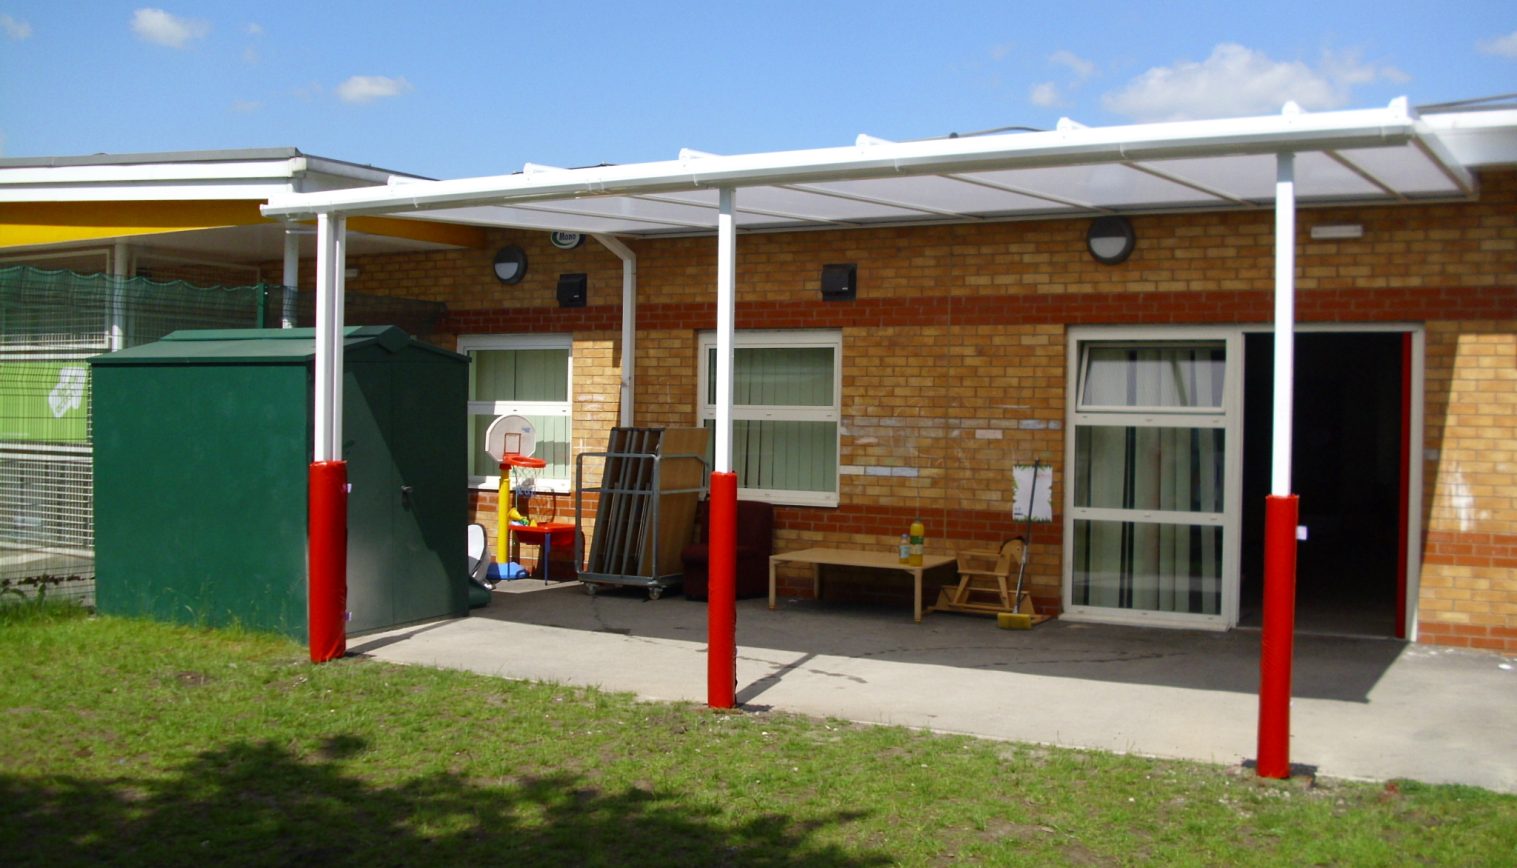 Ancoats & Miles Platting Out of School Club – Wall Mounted Canopy